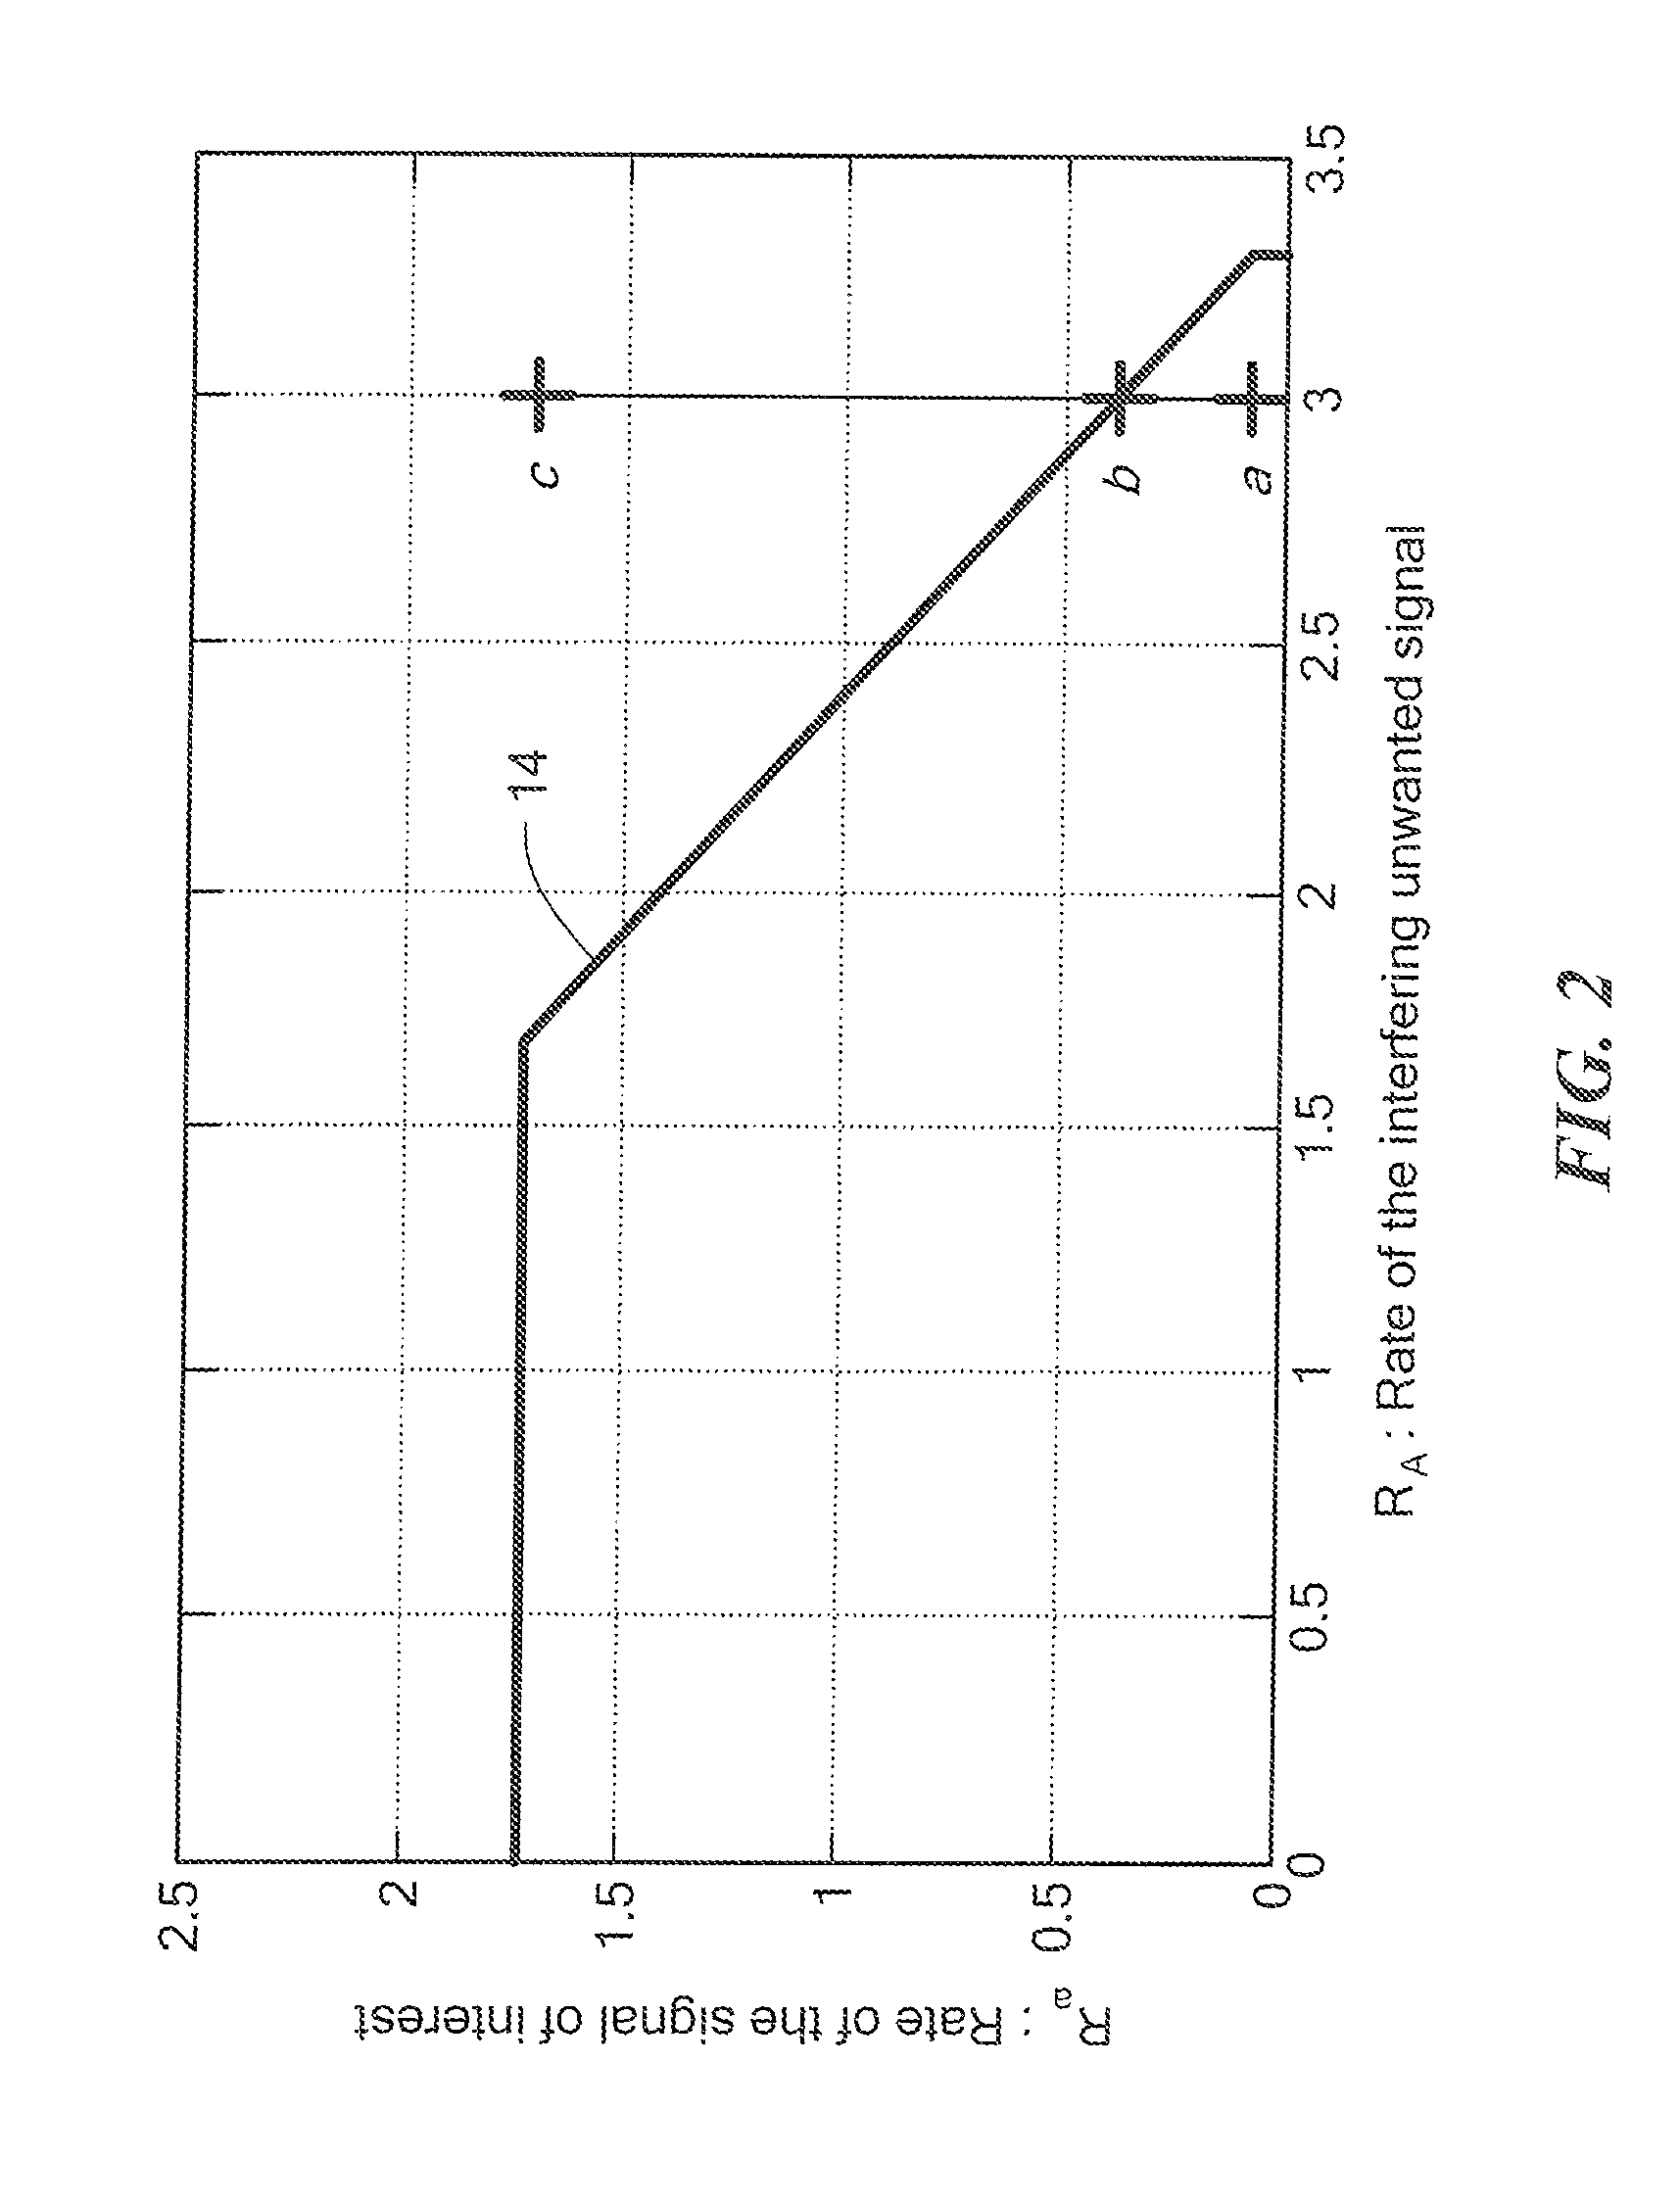 Method and apparatus for making optimal use of an asymmetric interference channel in wireless communication systems